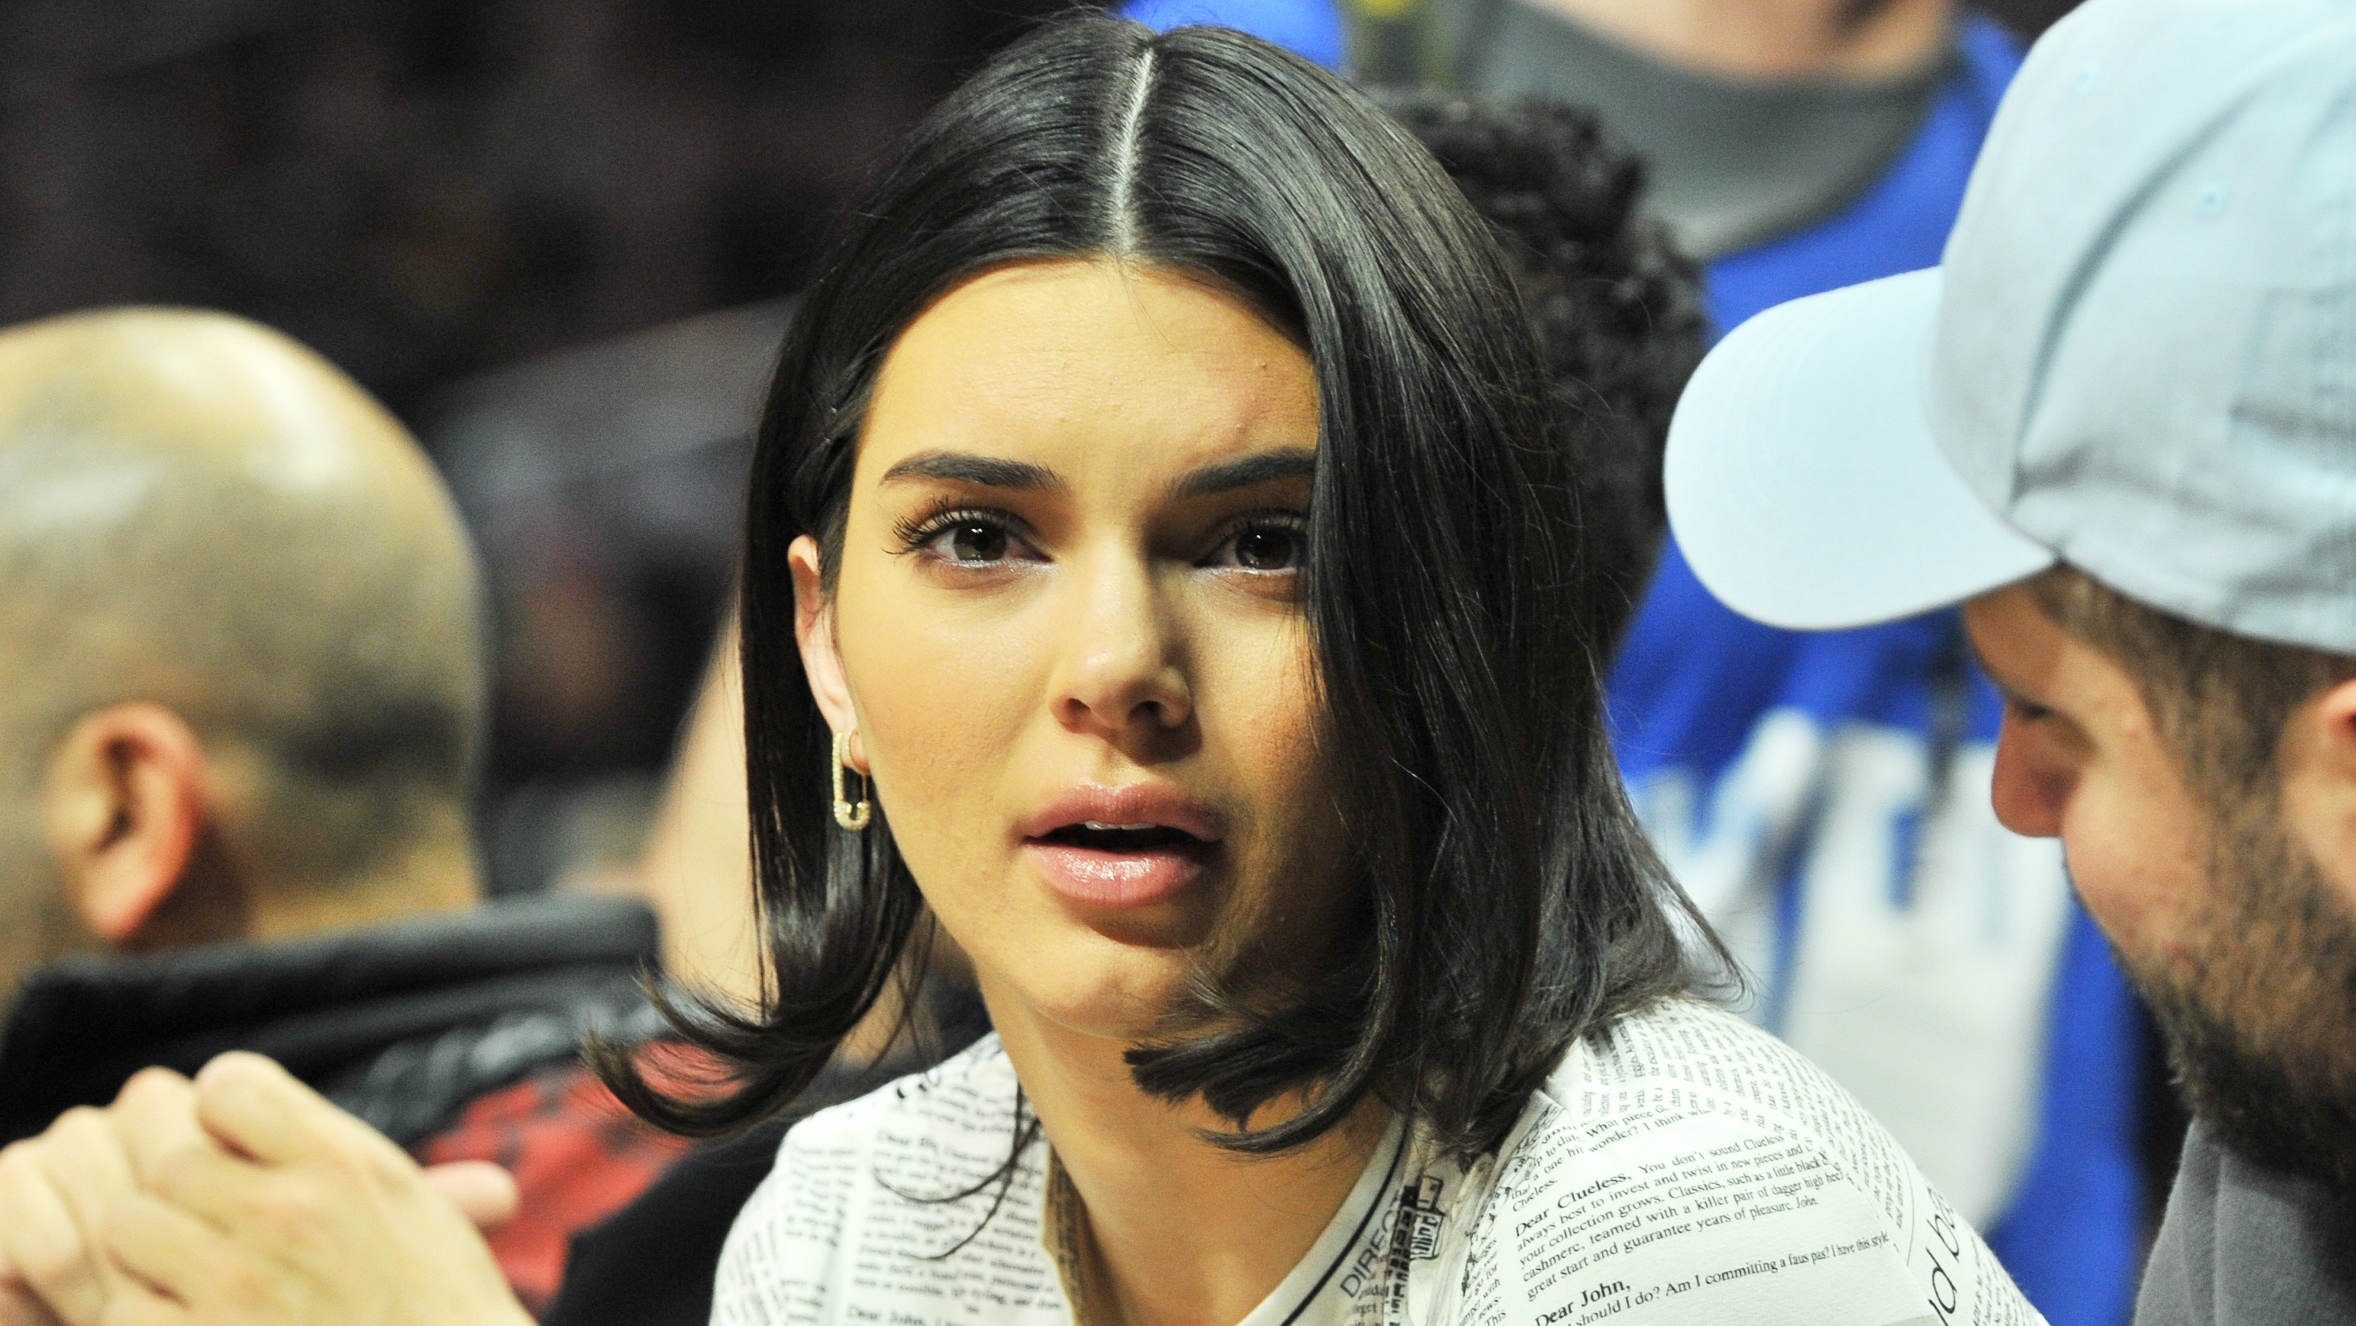 Kendall Jenner's baseball hat was the season's hottest it